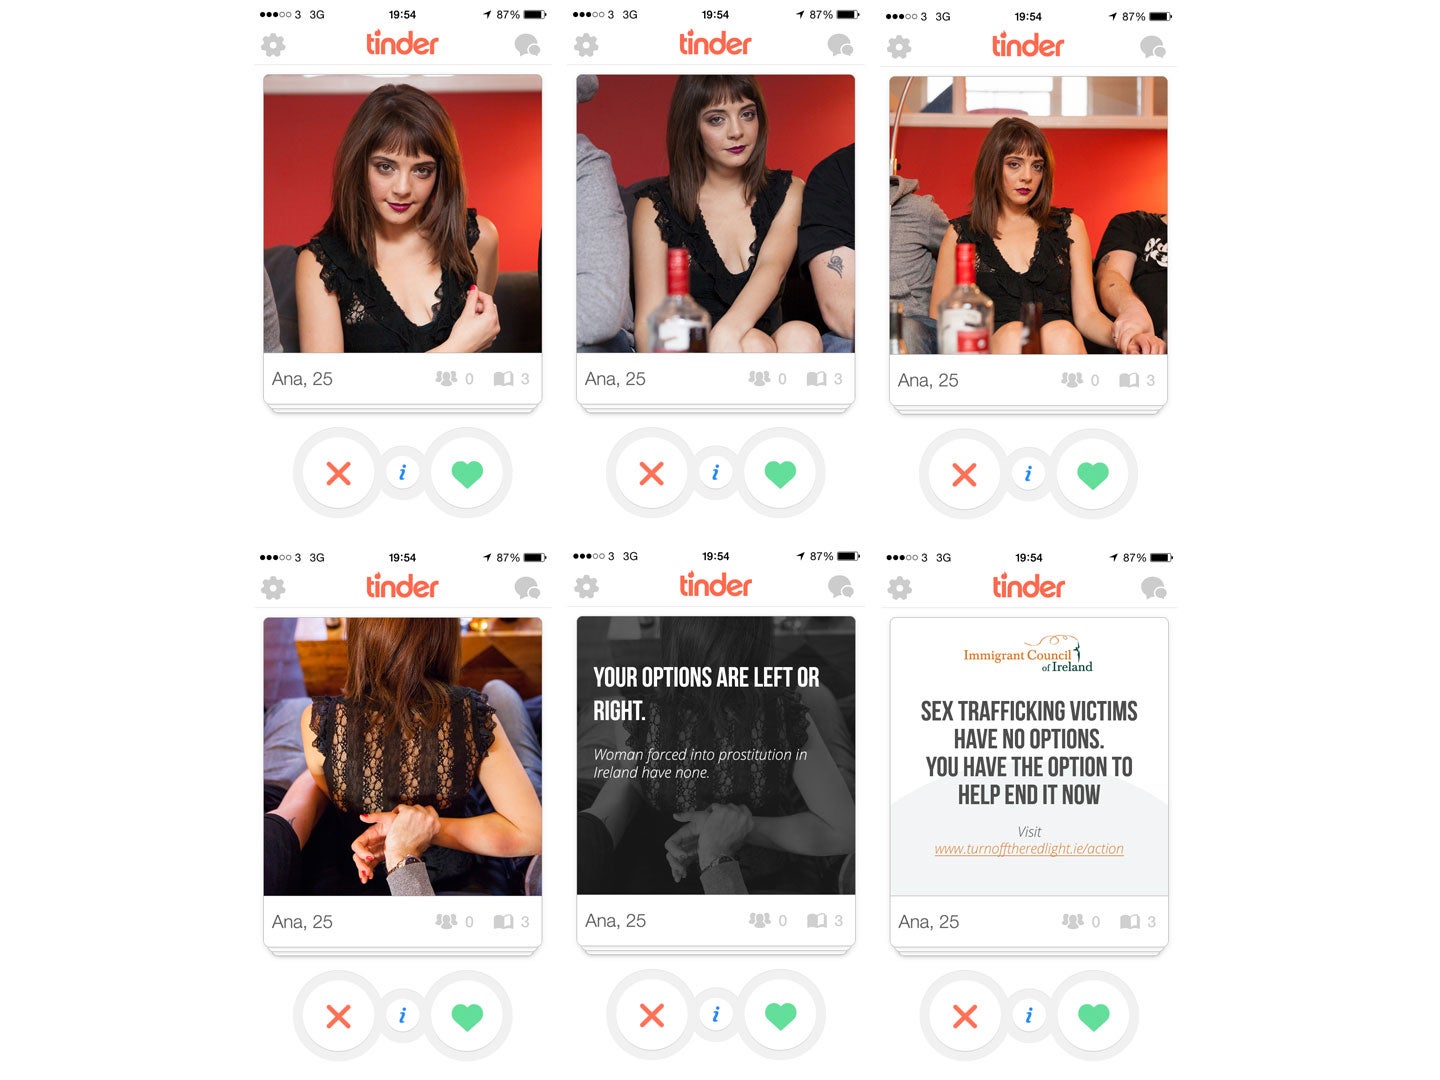 One of the fake profiles used on Tinder to highlight sex trafficking by EightyTwenty and the Irish Immigrant Council